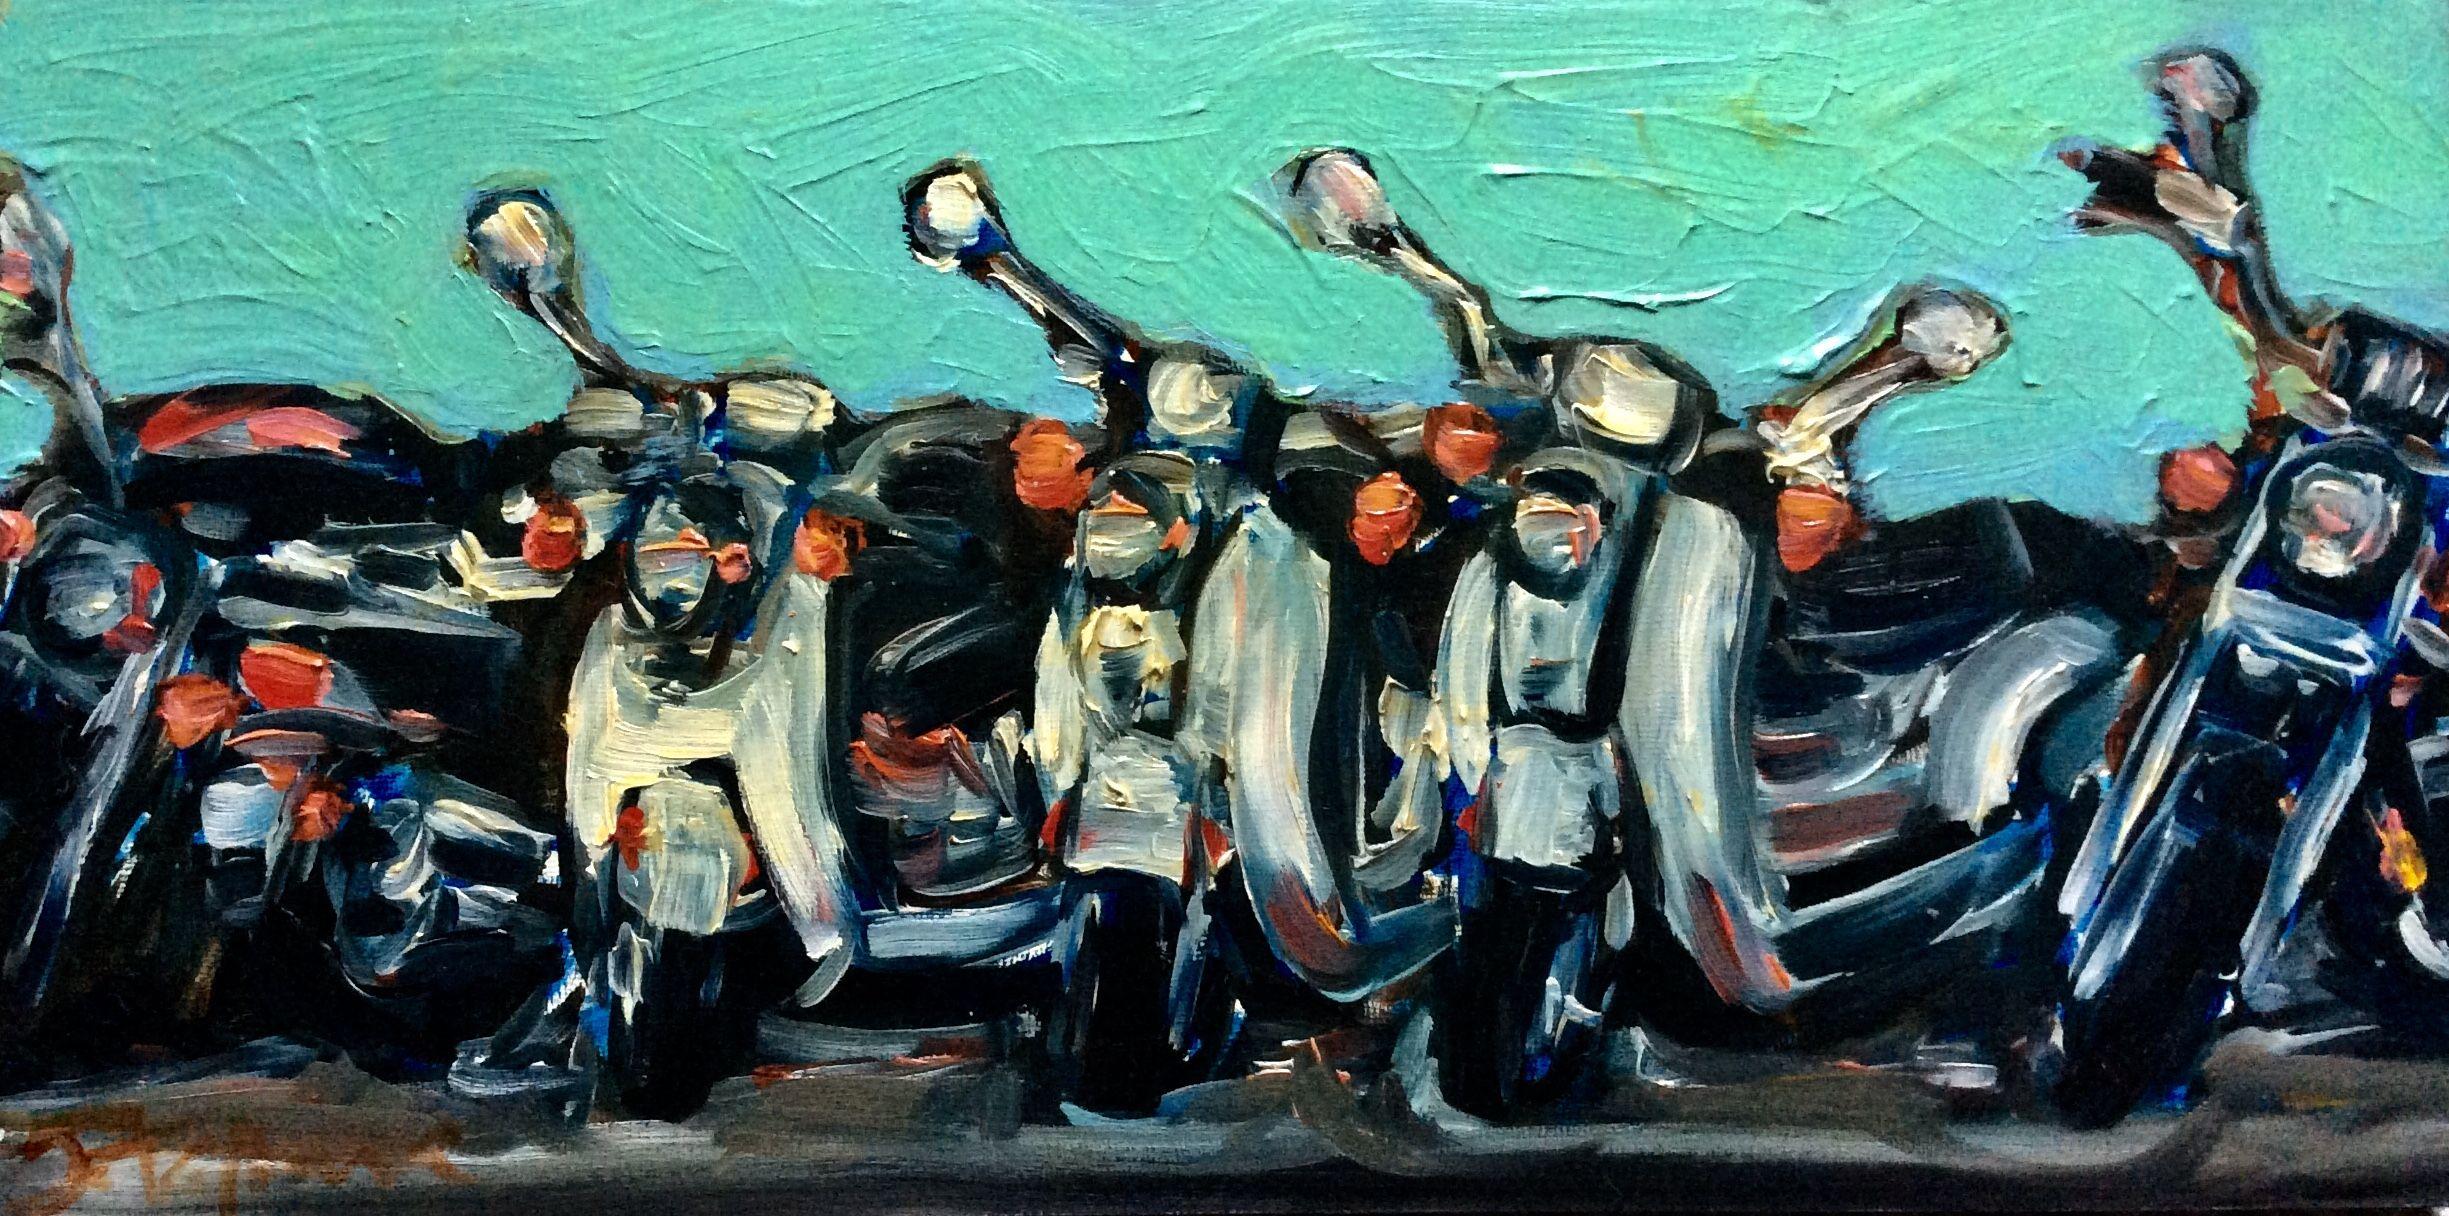 I saw these 3 scooters nestled between 2 motorcycles on a street facing UC Berkeley. I love Vespas and thought of 3 friends getting together for coffee  :: Painting :: Impressionist :: This piece comes with an official certificate of authenticity